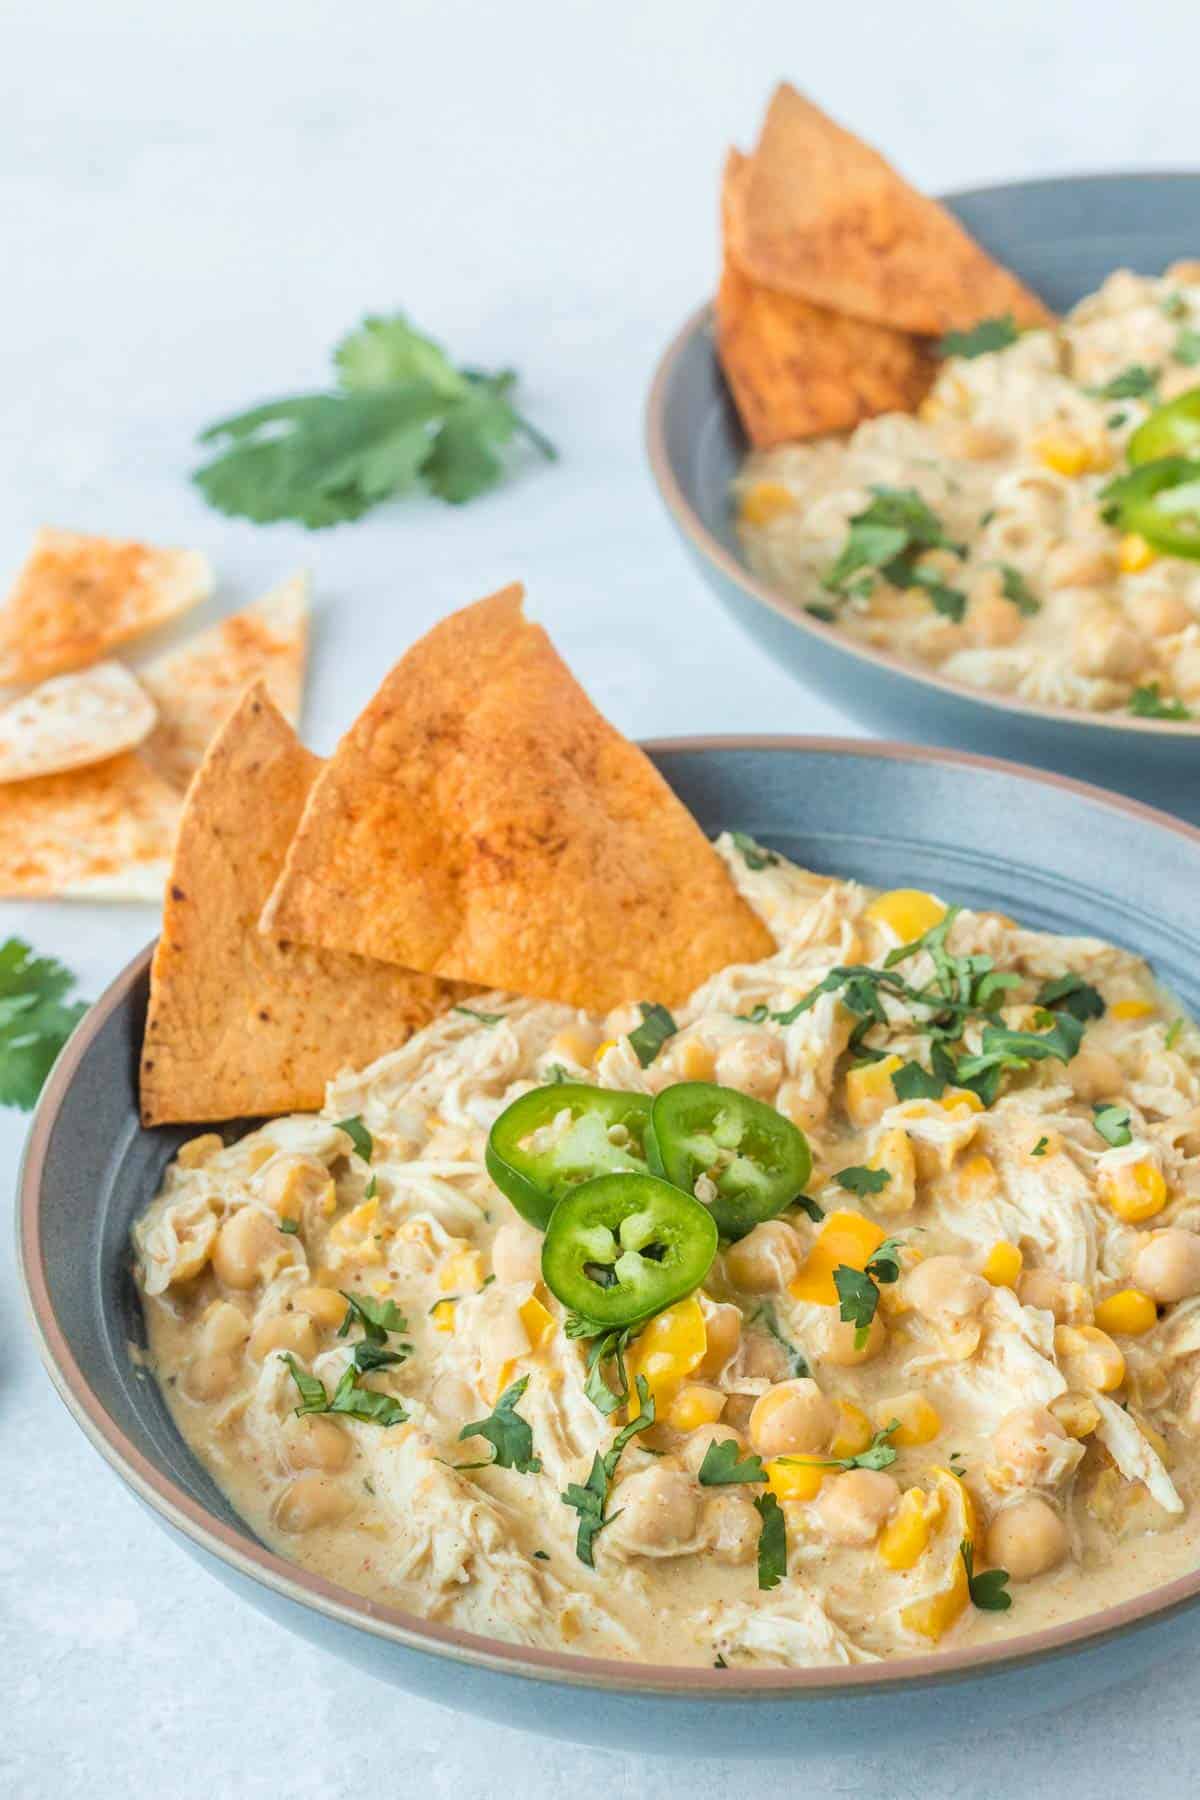 white chicken chili in a blue bowl with cilantro, jalapeno slices, and tortilla chips on top